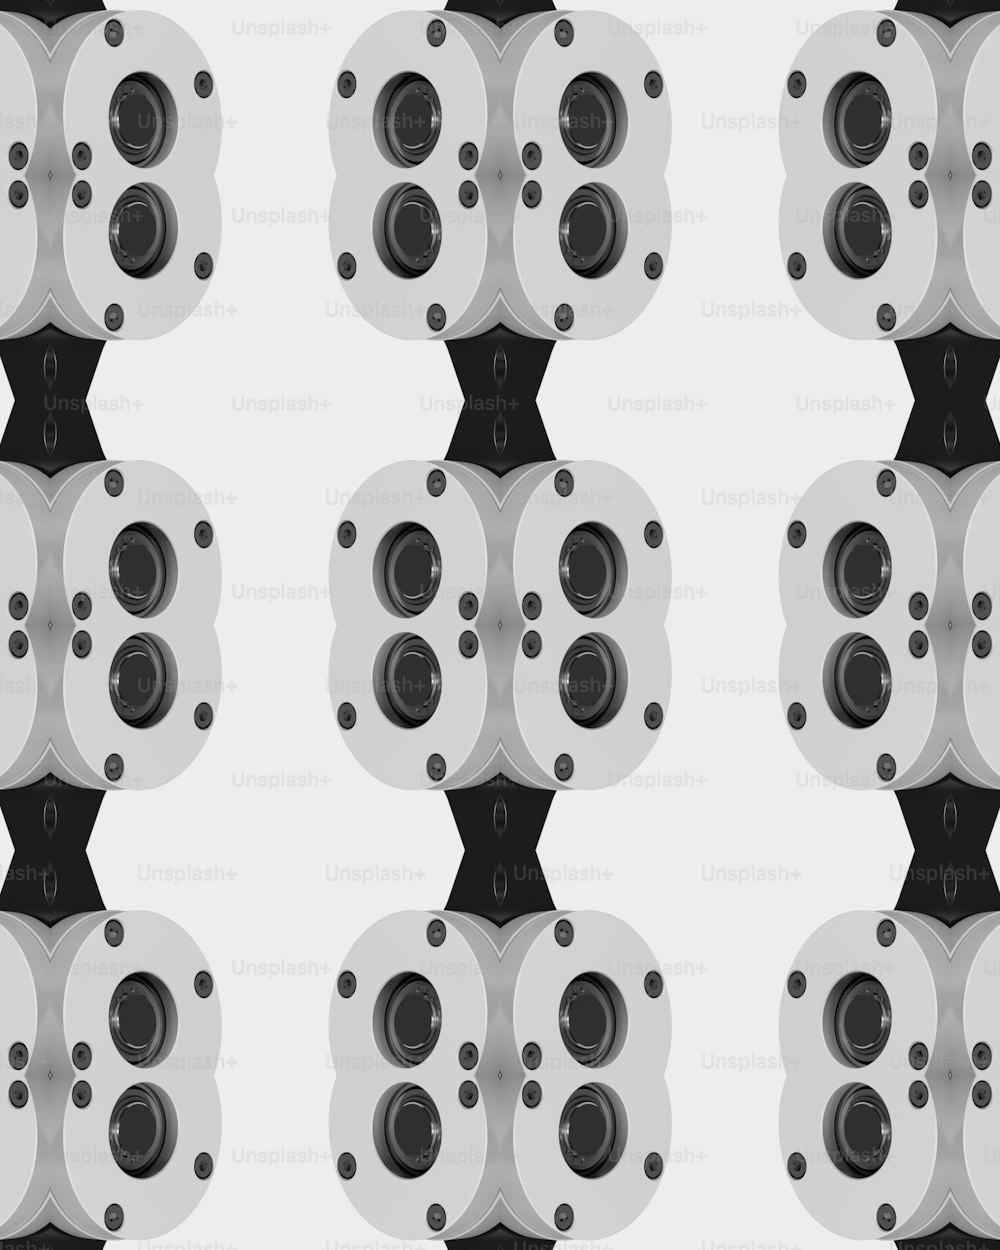 a pattern of black and white circles on a white background